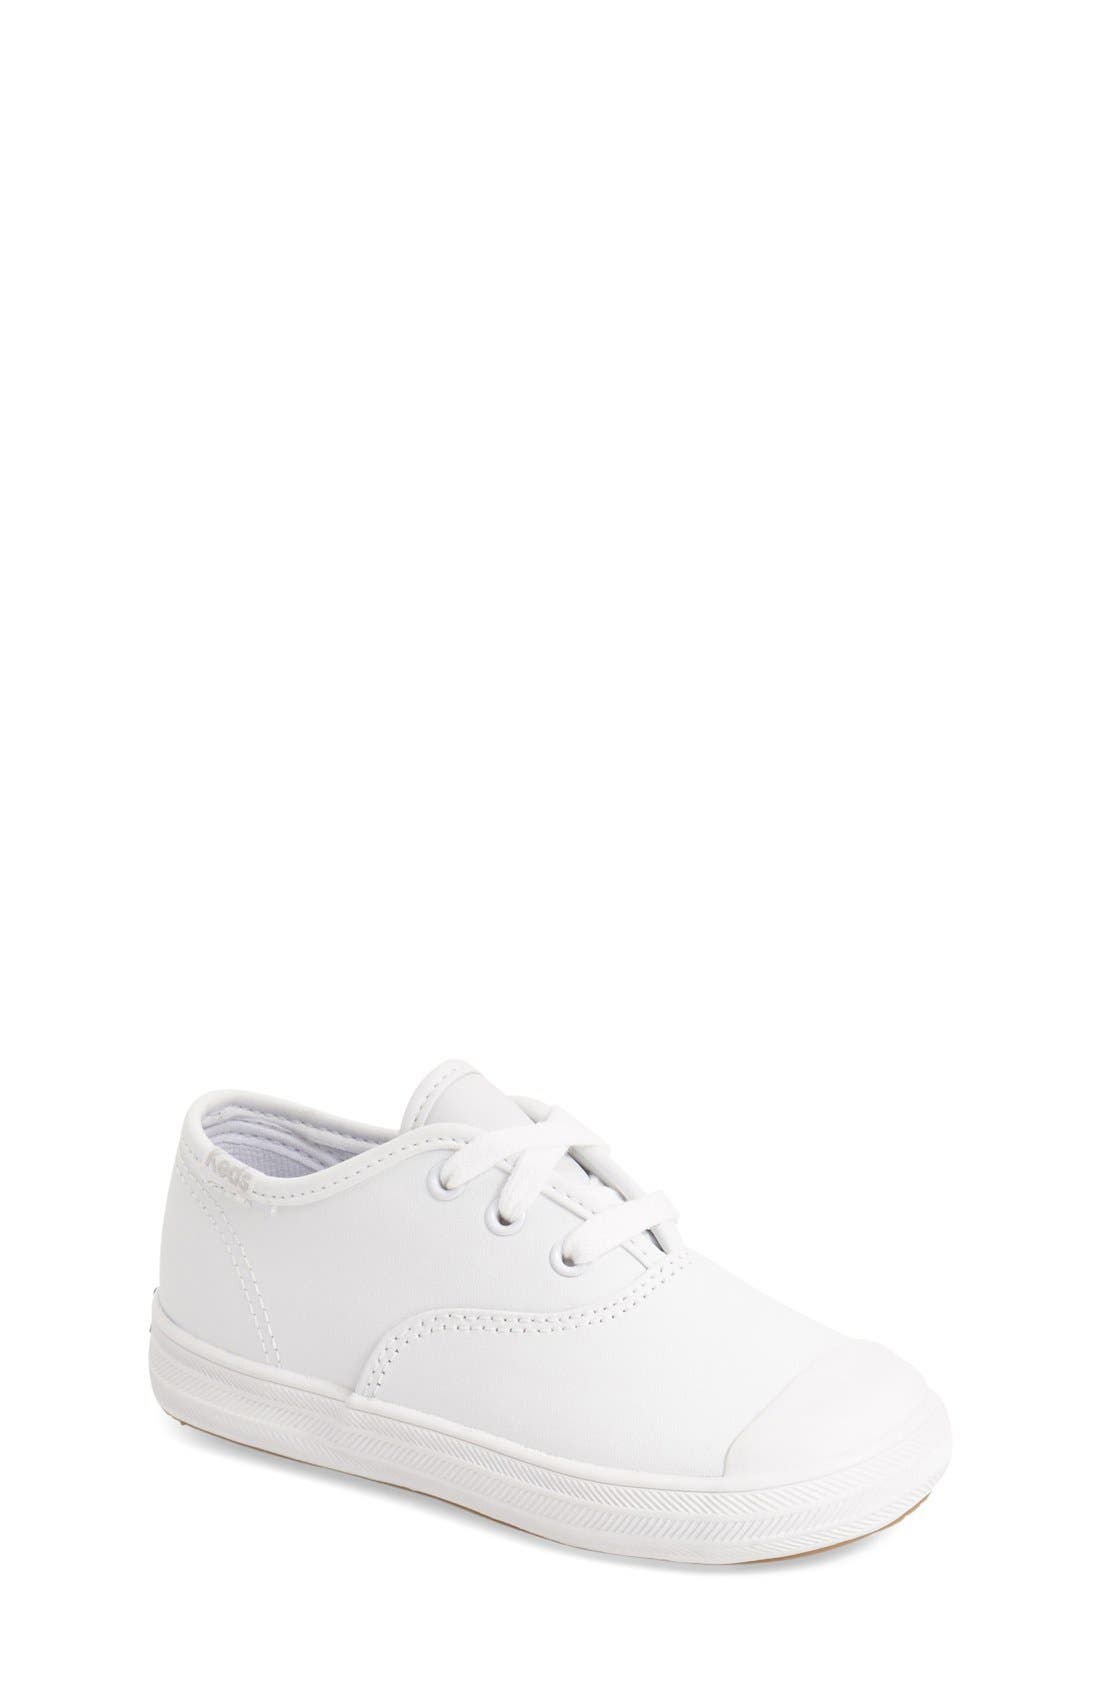 keds walking shoes for babies